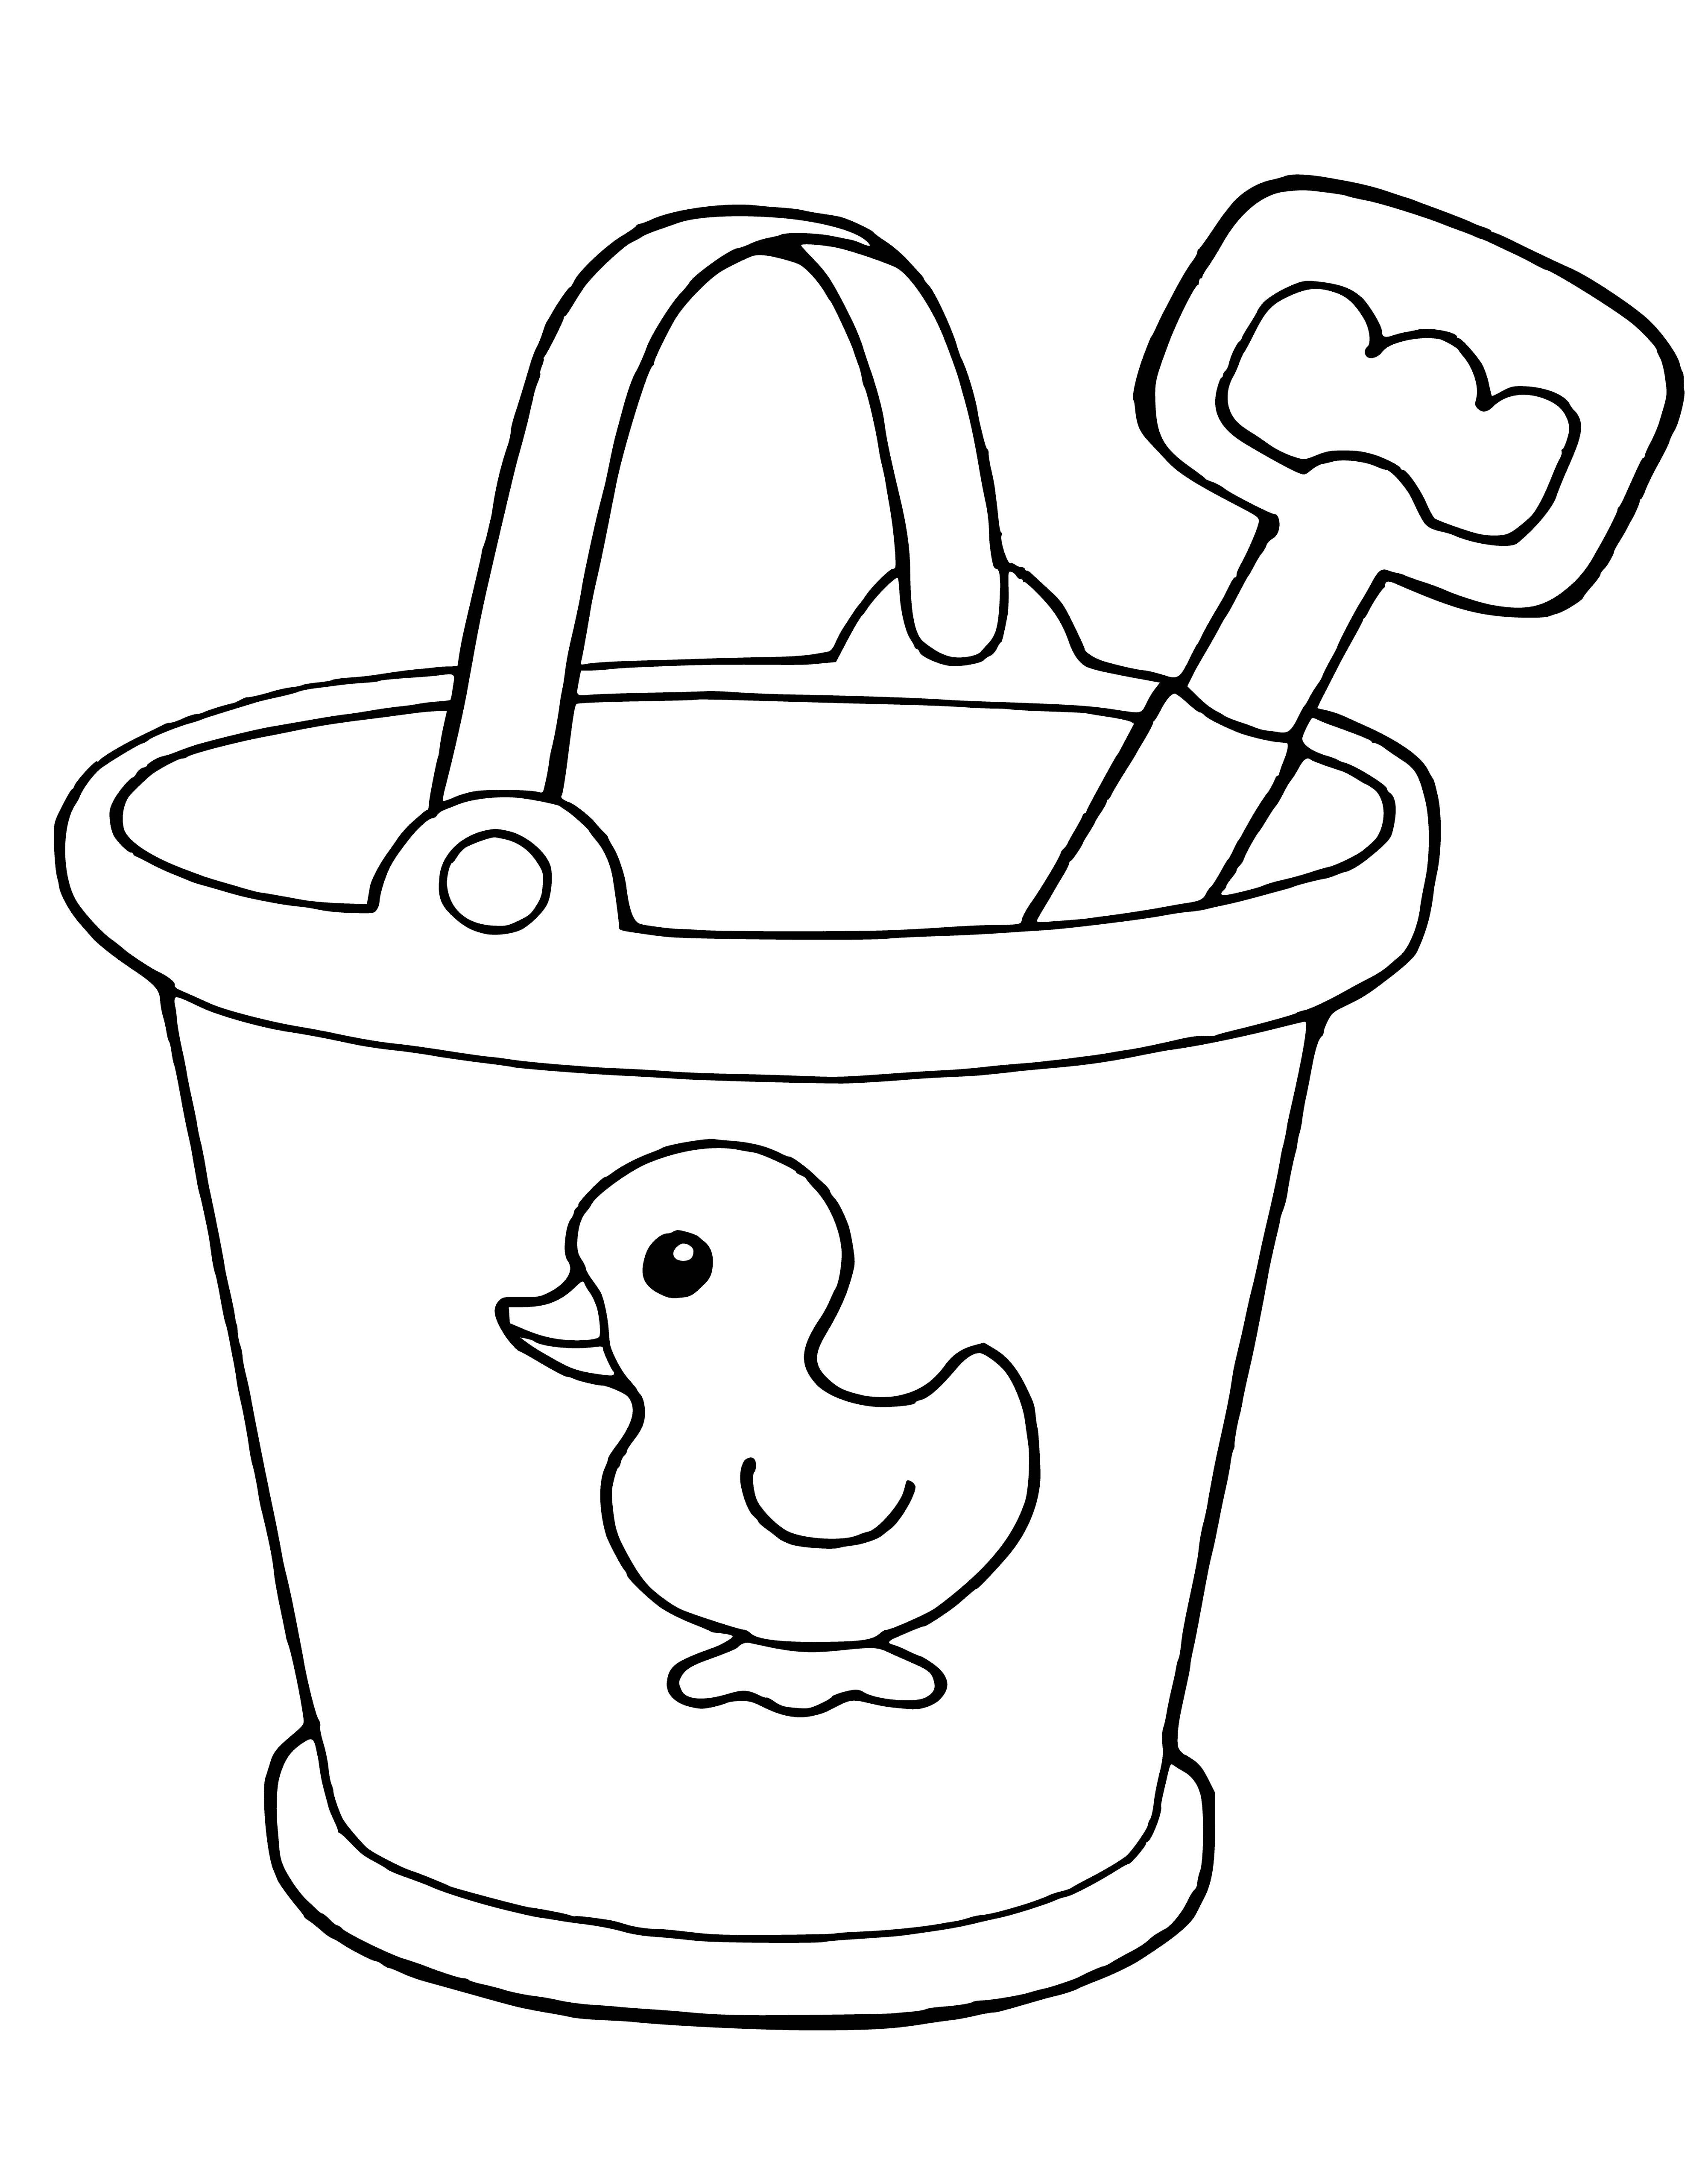 coloring page: 4 toys in a sandbox - blue bucket w/ sand, red shovel, yellow rake, purple bucket w/ handle. Purple next to yellow, red & blue together.